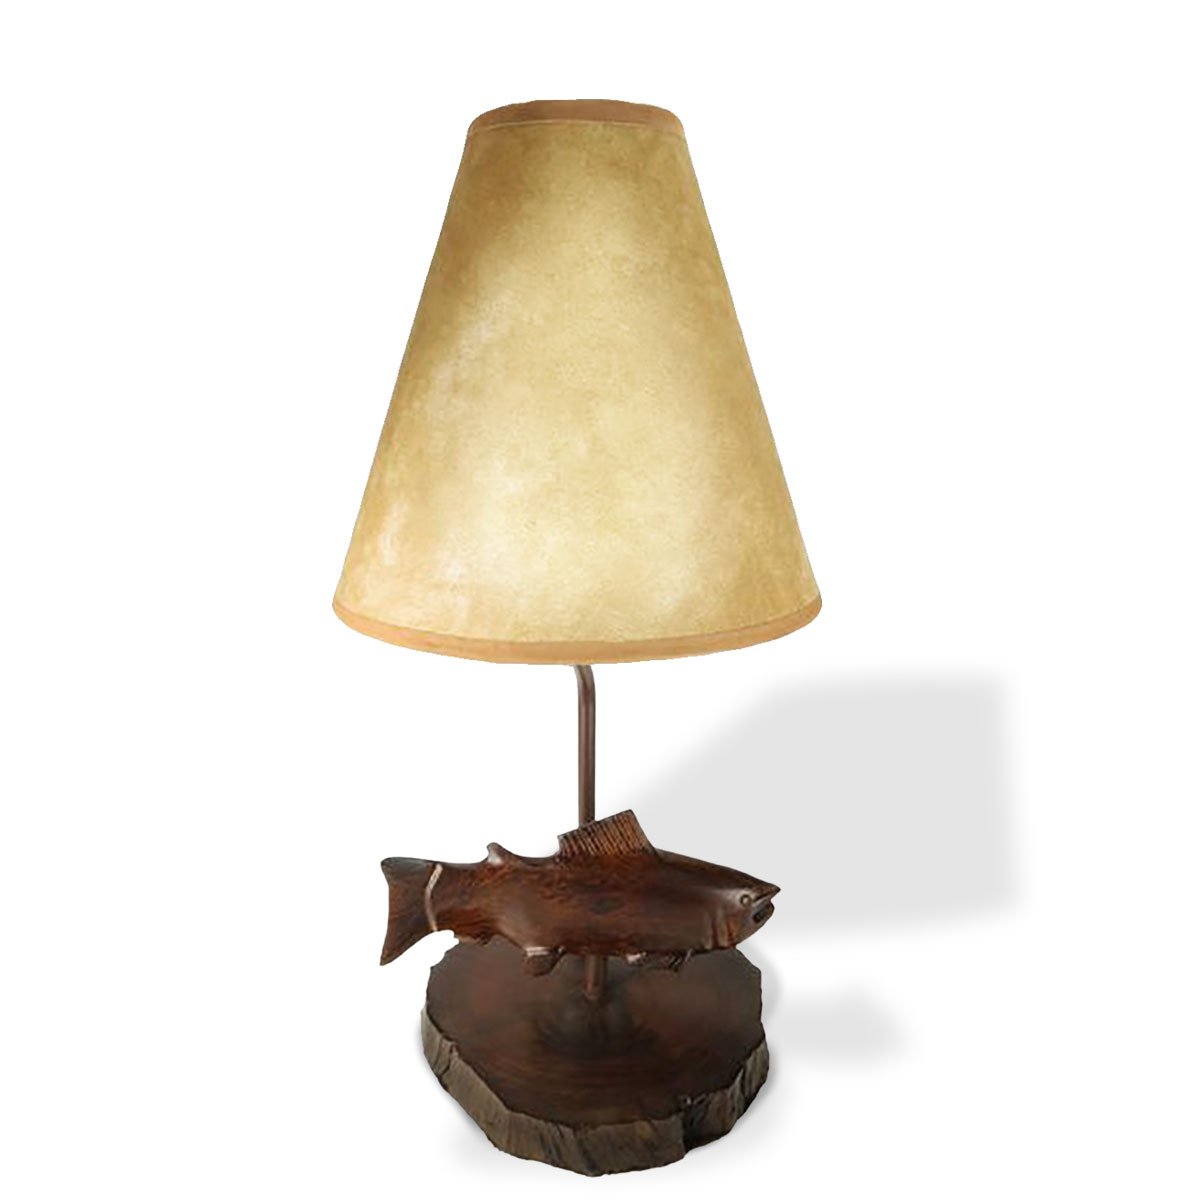 172019 - Trout Carved Ironwood Vanity Lamp with Shade